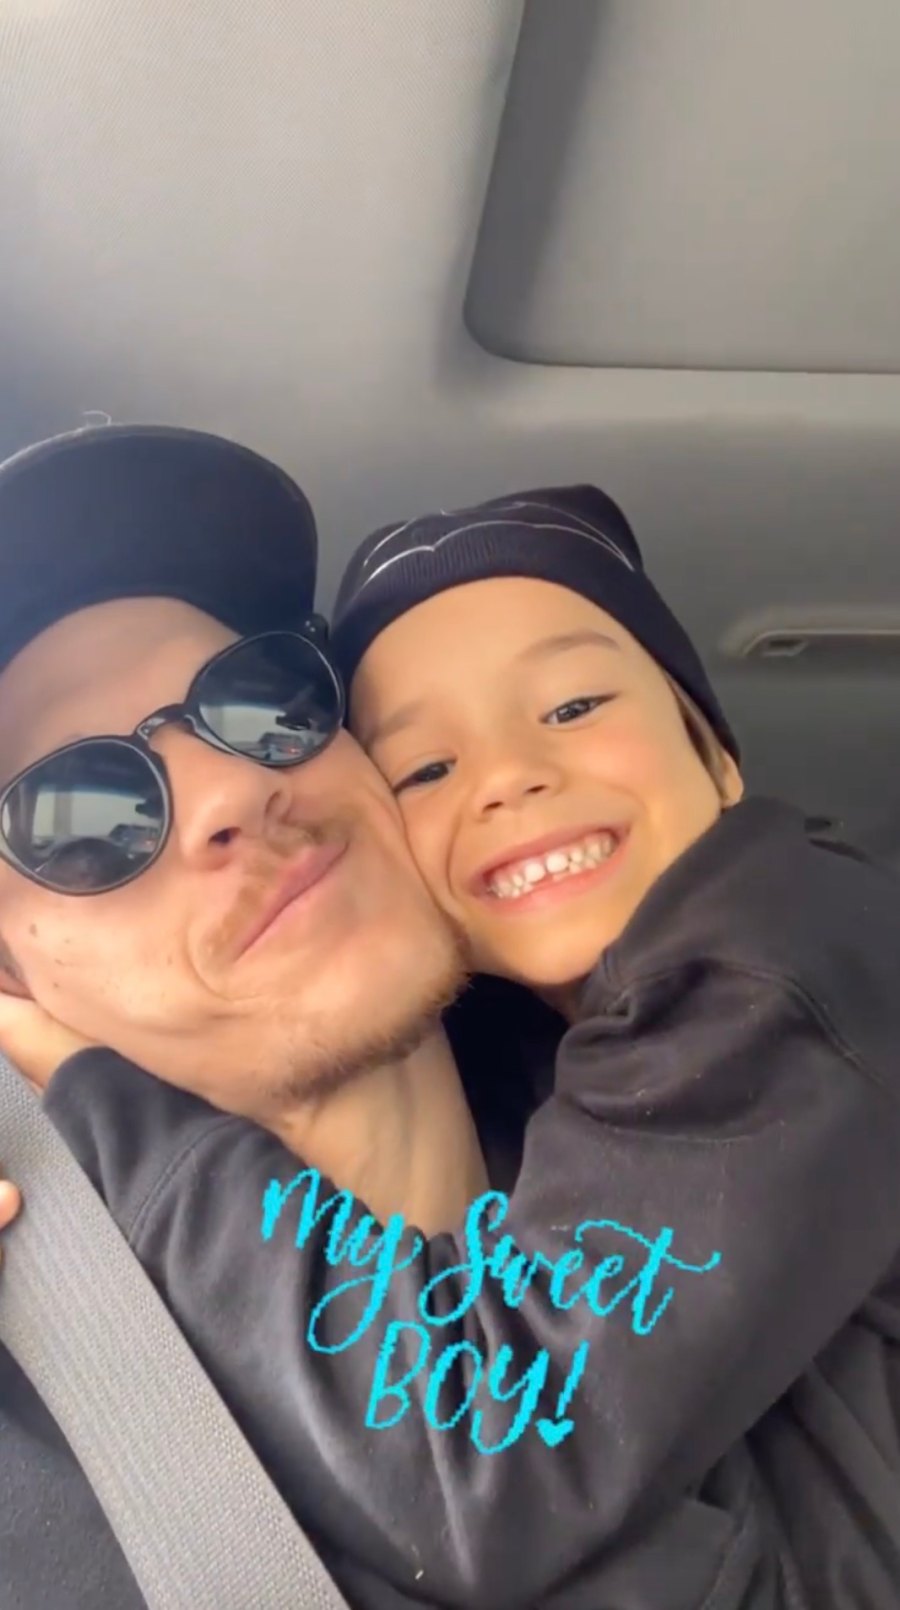 ‘Sweet Boy’! See Ryan Dorsey and Son Josey's Cute Pics Over the Years